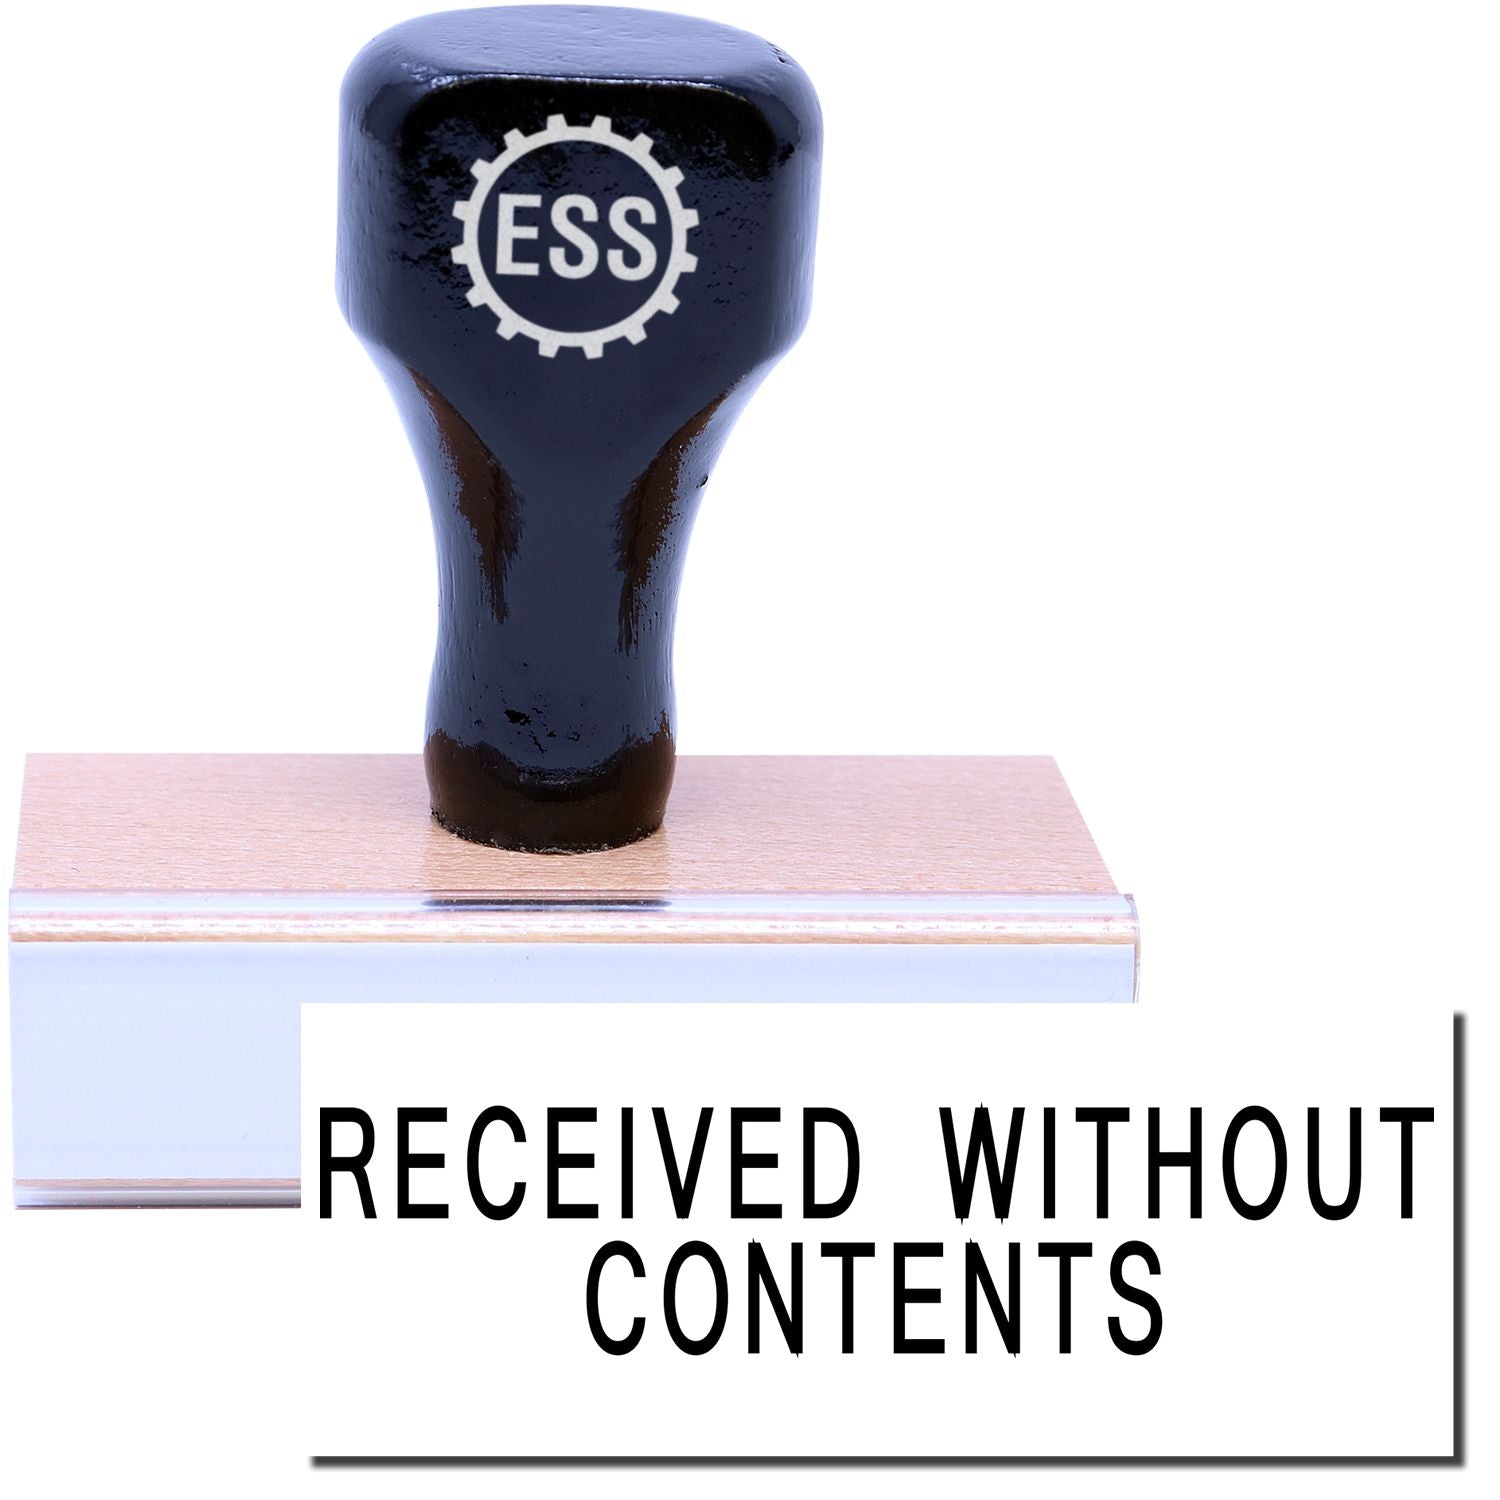 A stock office rubber stamp with a stamped image showing how the text "RECEIVED WITHOUT CONTENTS" is displayed after stamping.